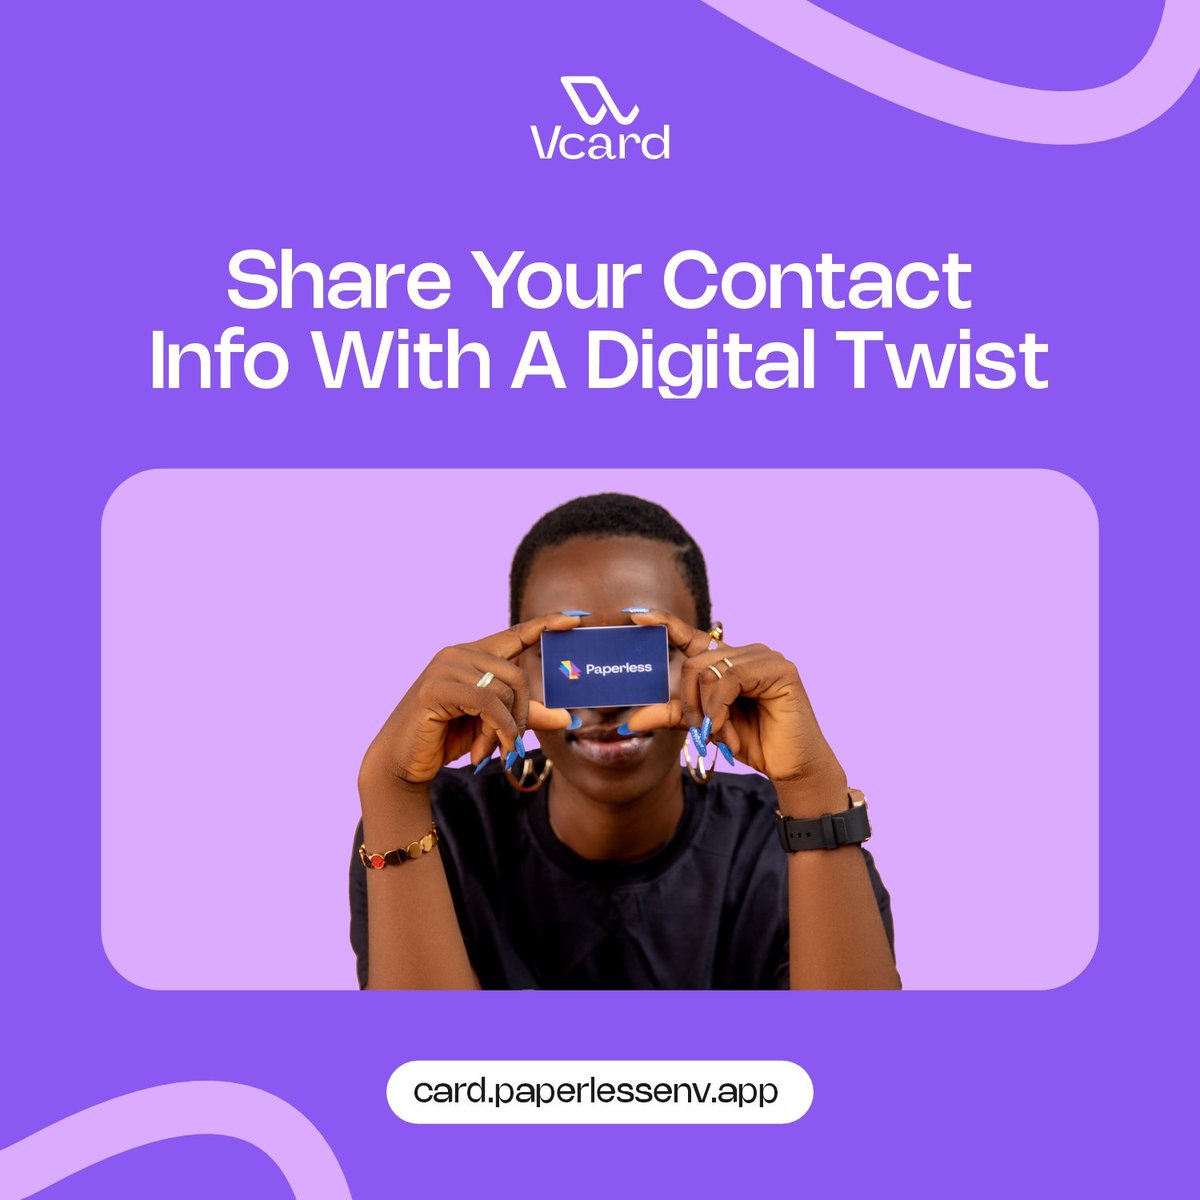 Ditch the paper card and keep the connection flowing with Paperless Virtual Card.

Share your Contact Info effortlessly with a digital twist.

#paperless #pvc #vcard #software #softwaresolutions #fypviral #fypシ